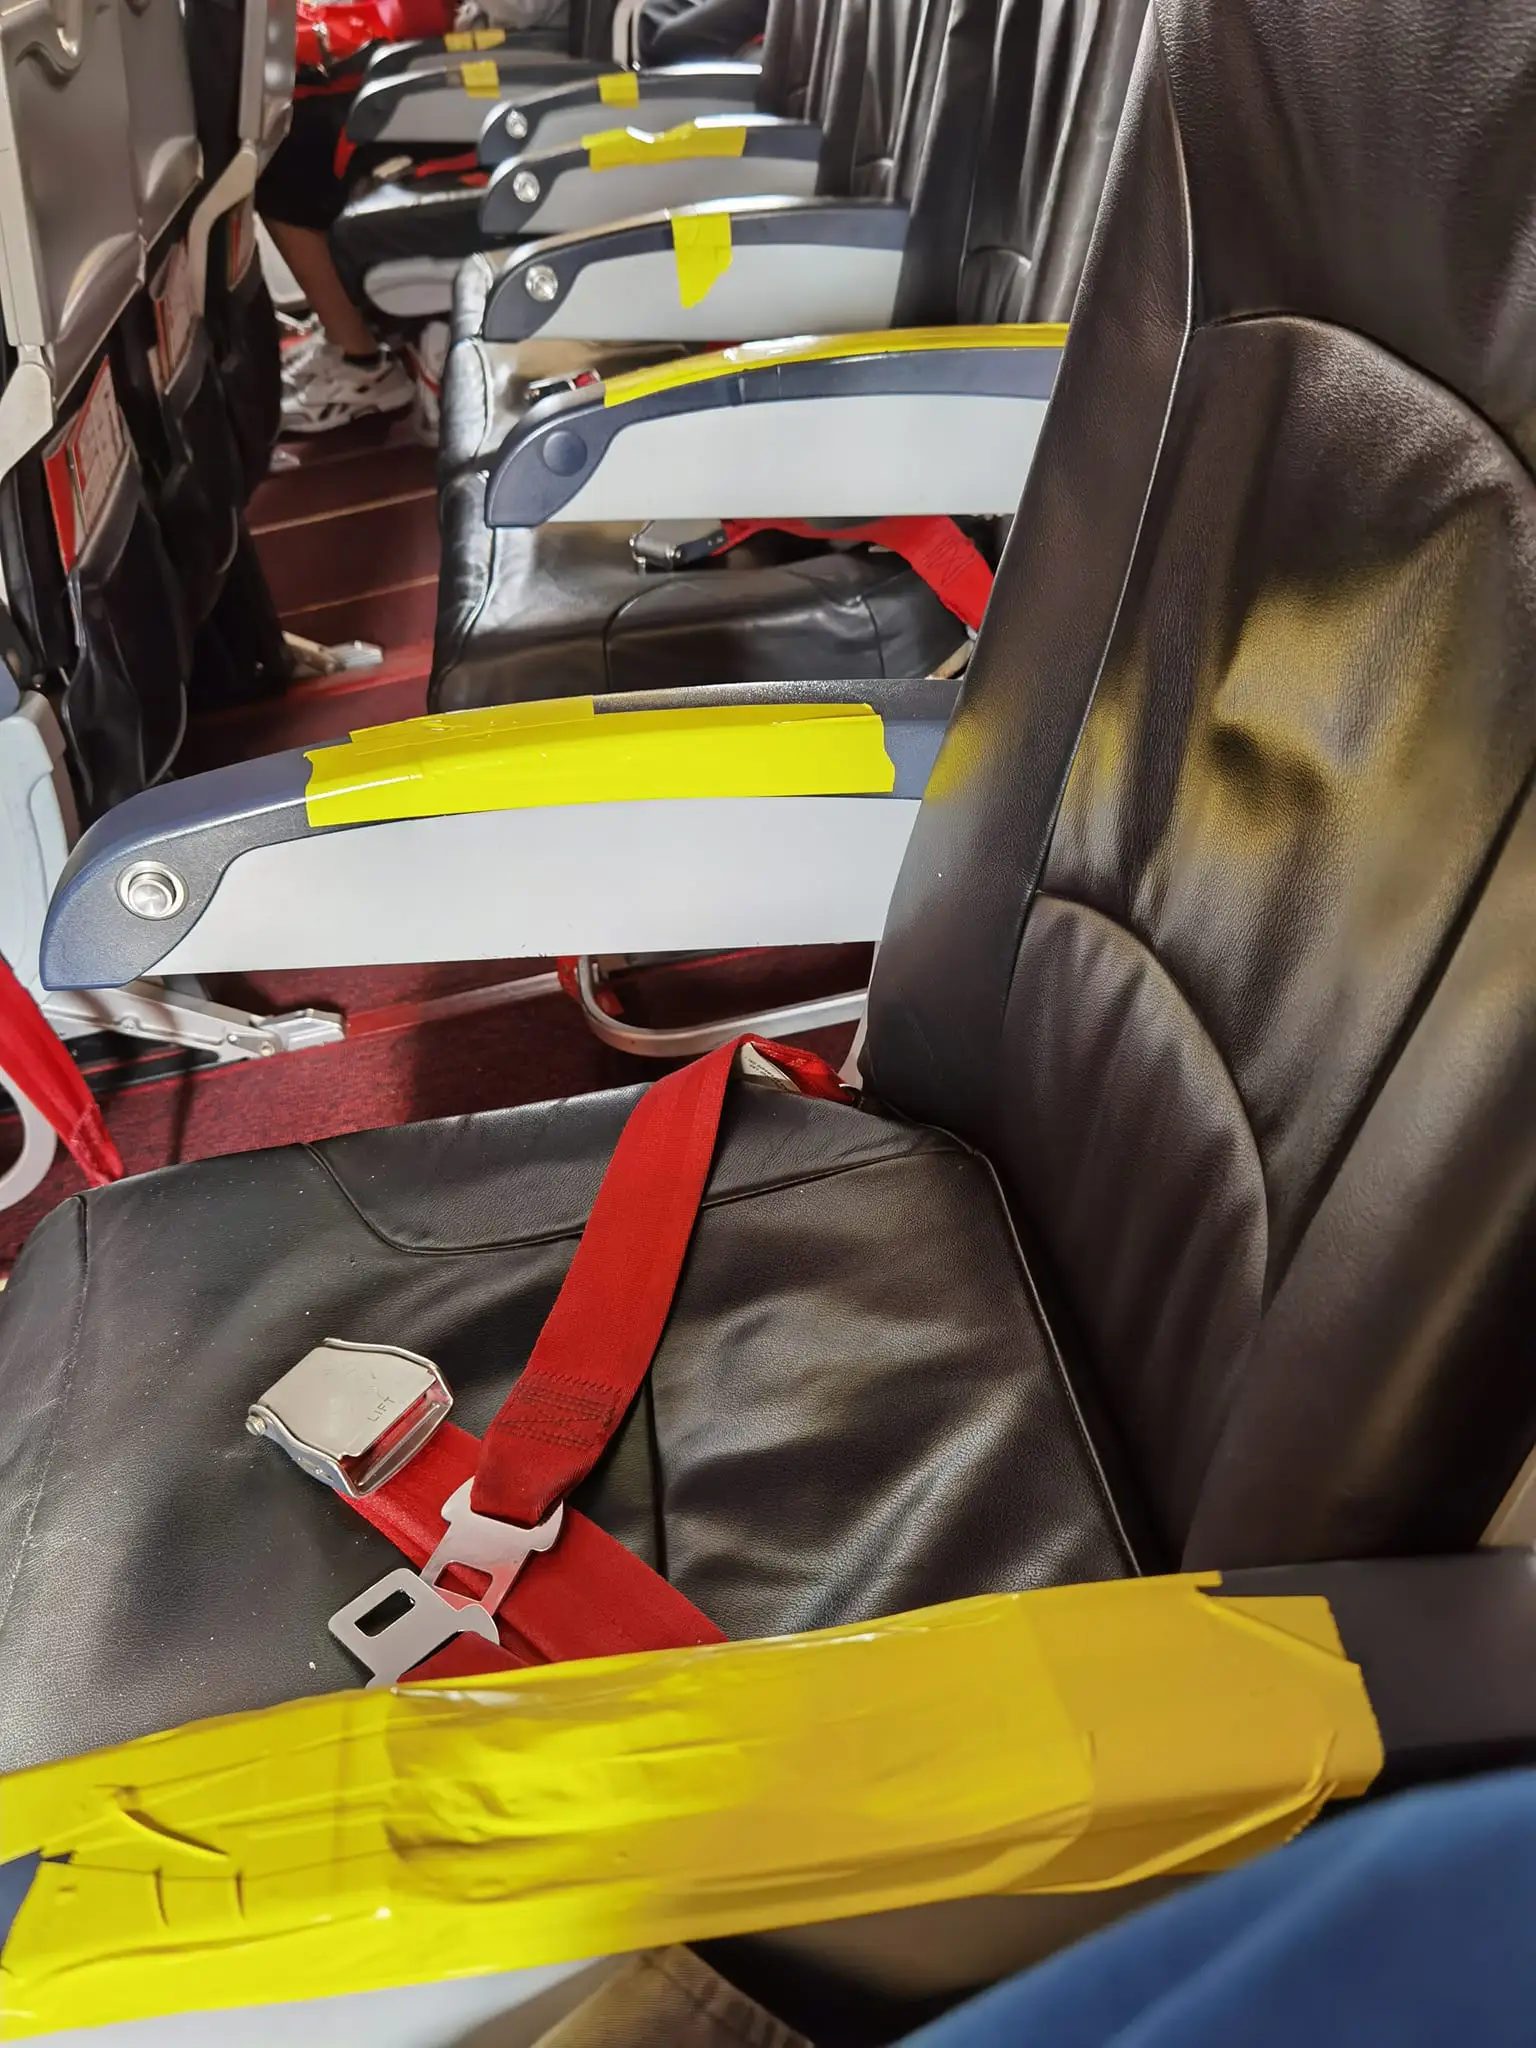 Airasia: taped armrests was due to spare parts shortage, not safety issues | weirdkaya